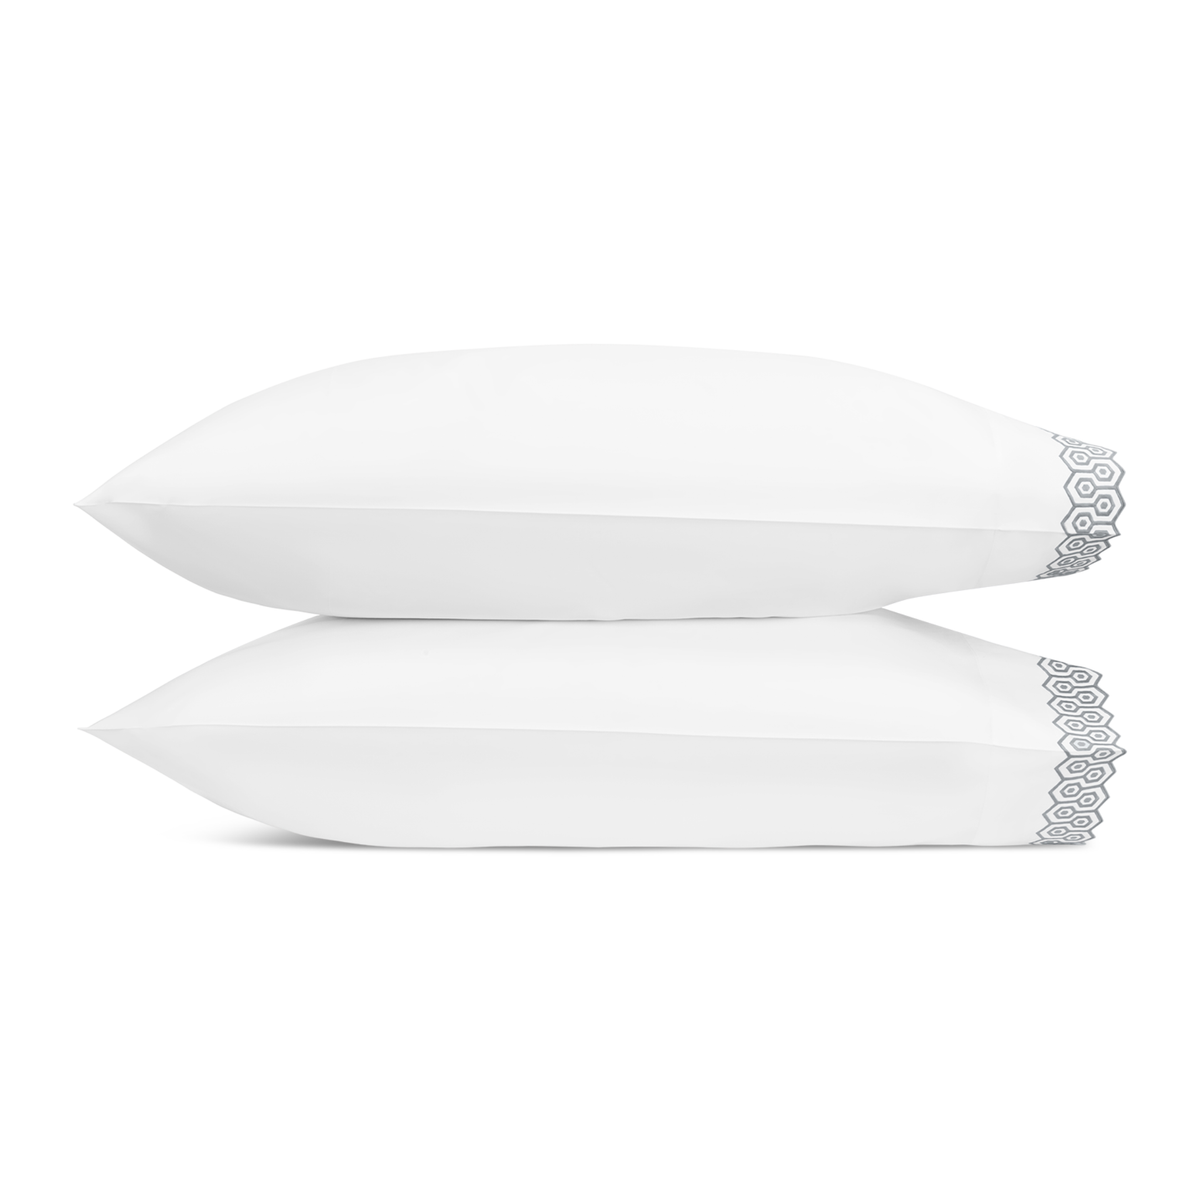 Pair of Pillowcases of Matouk Felix Bedding in Silver Color